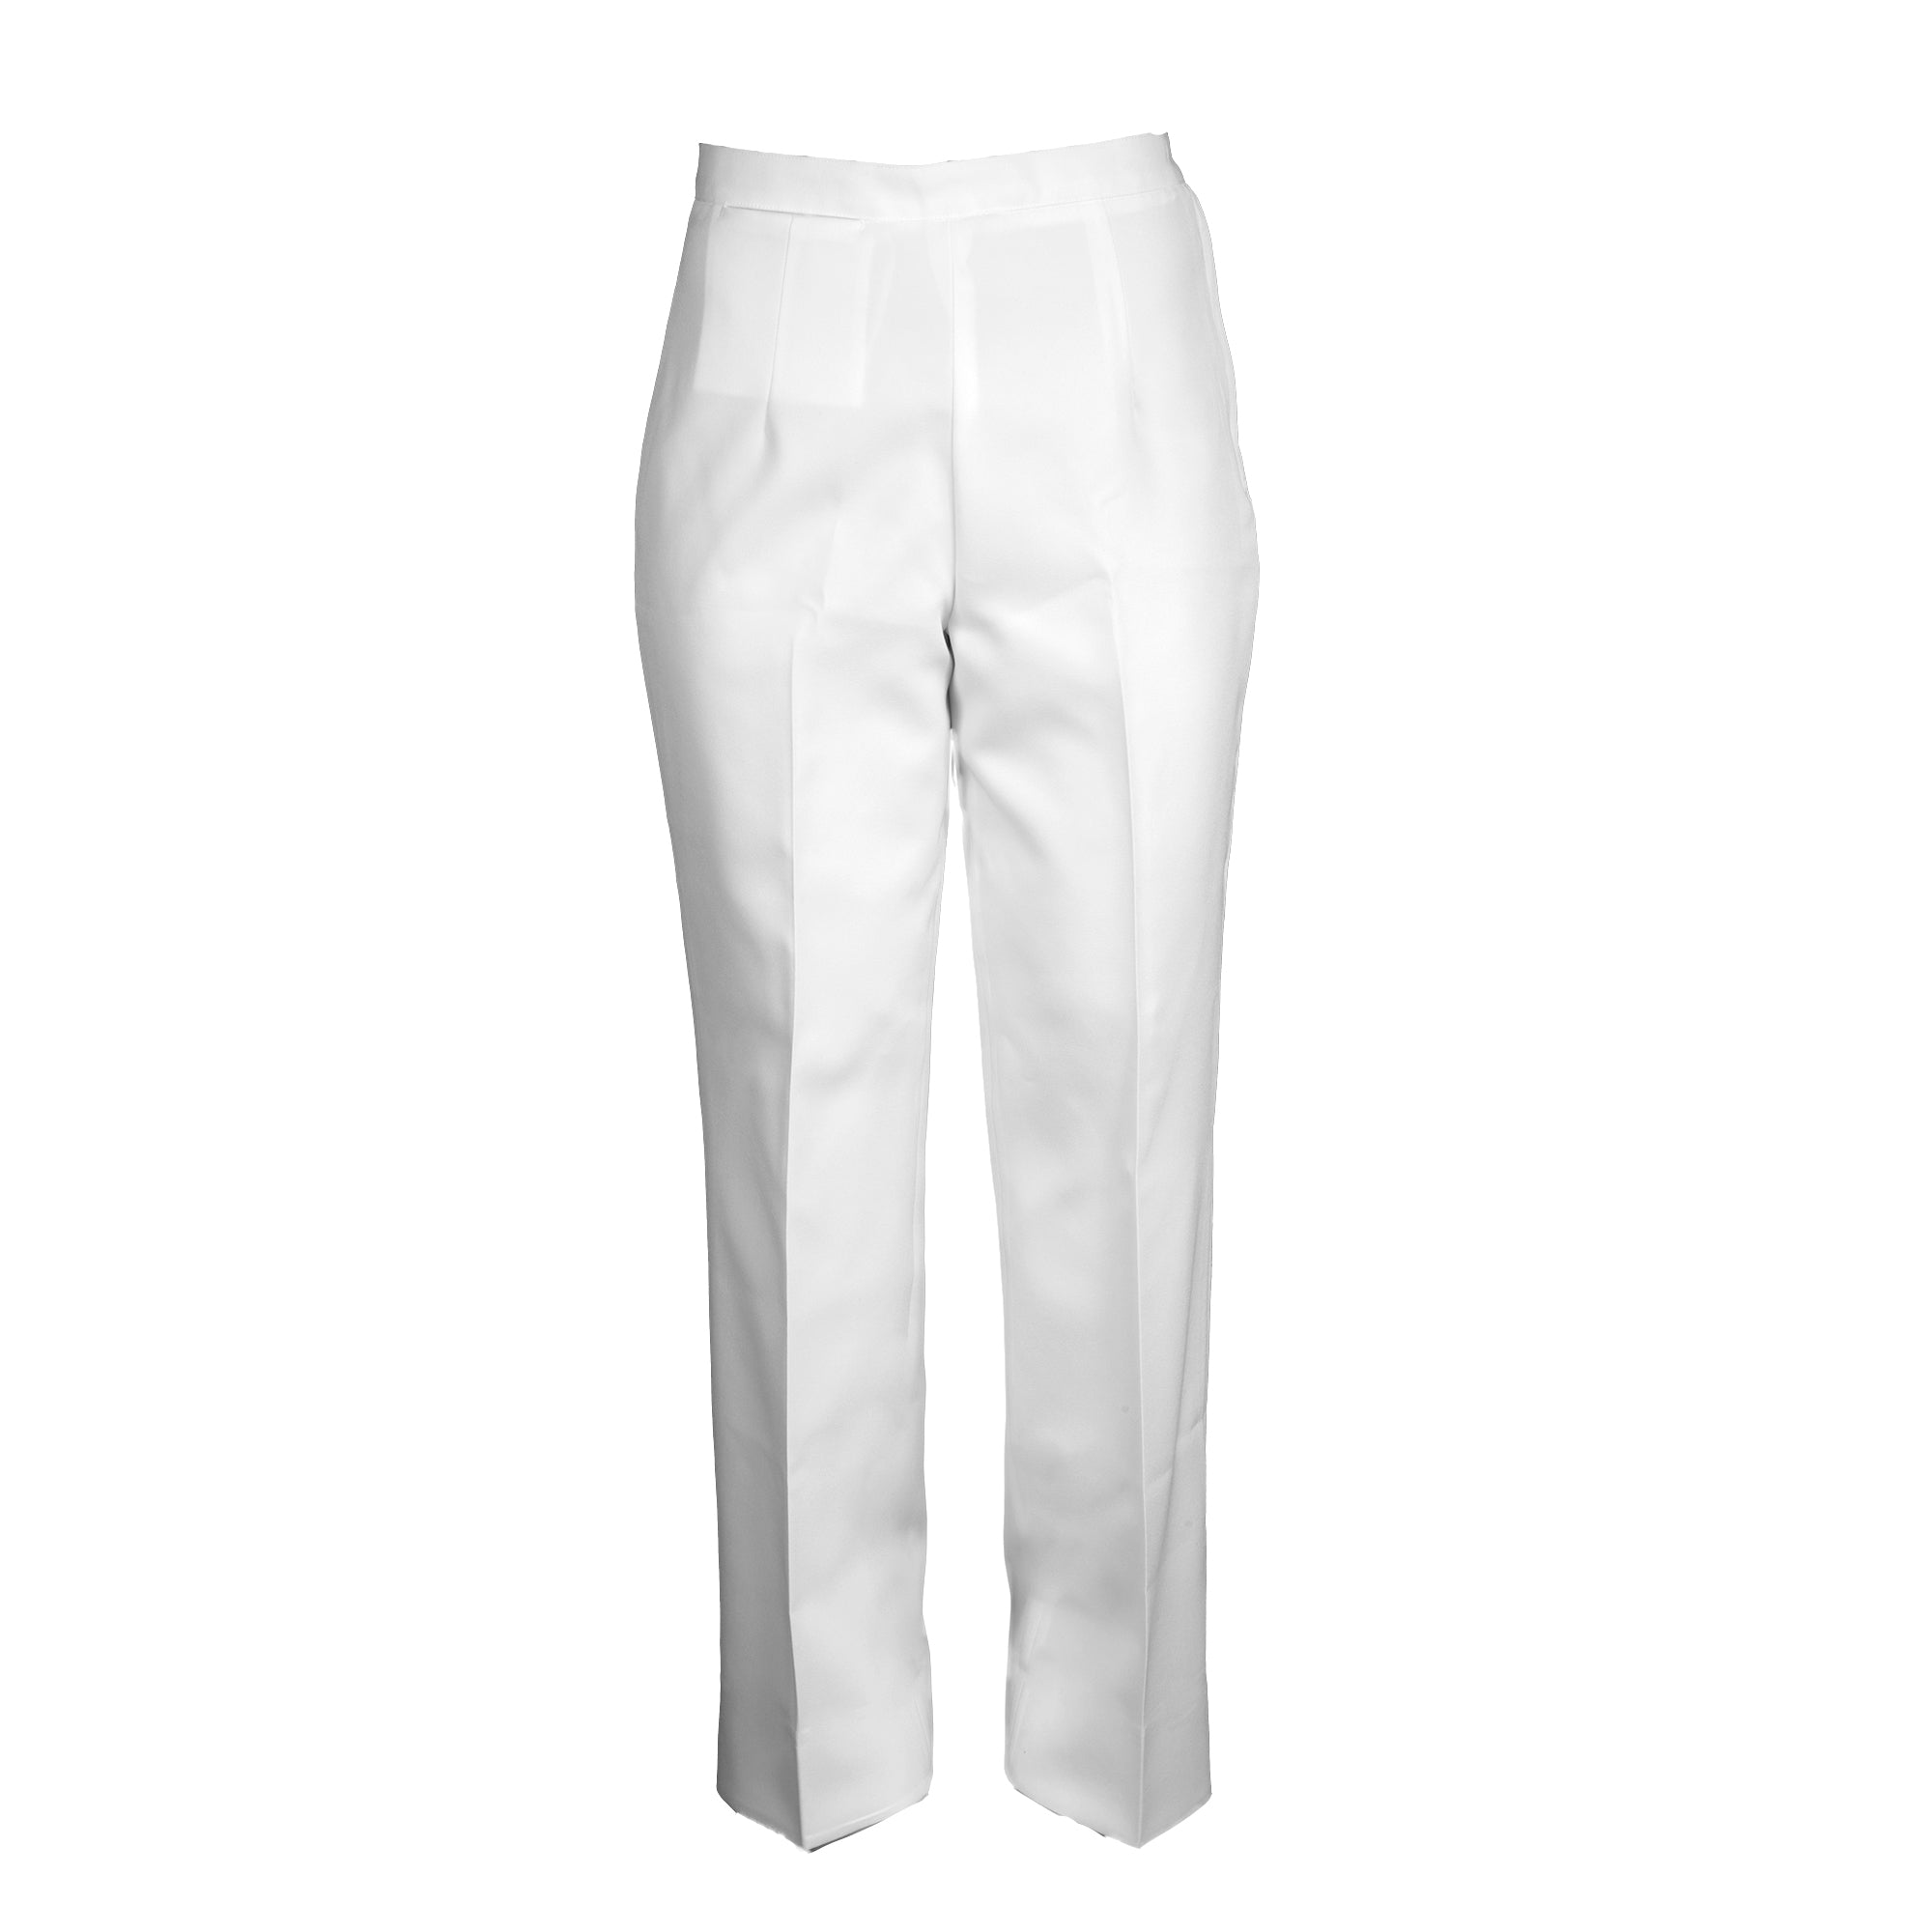 US NAVY Men Naval Officer/CPO Summer White CNT Trousers Athletic